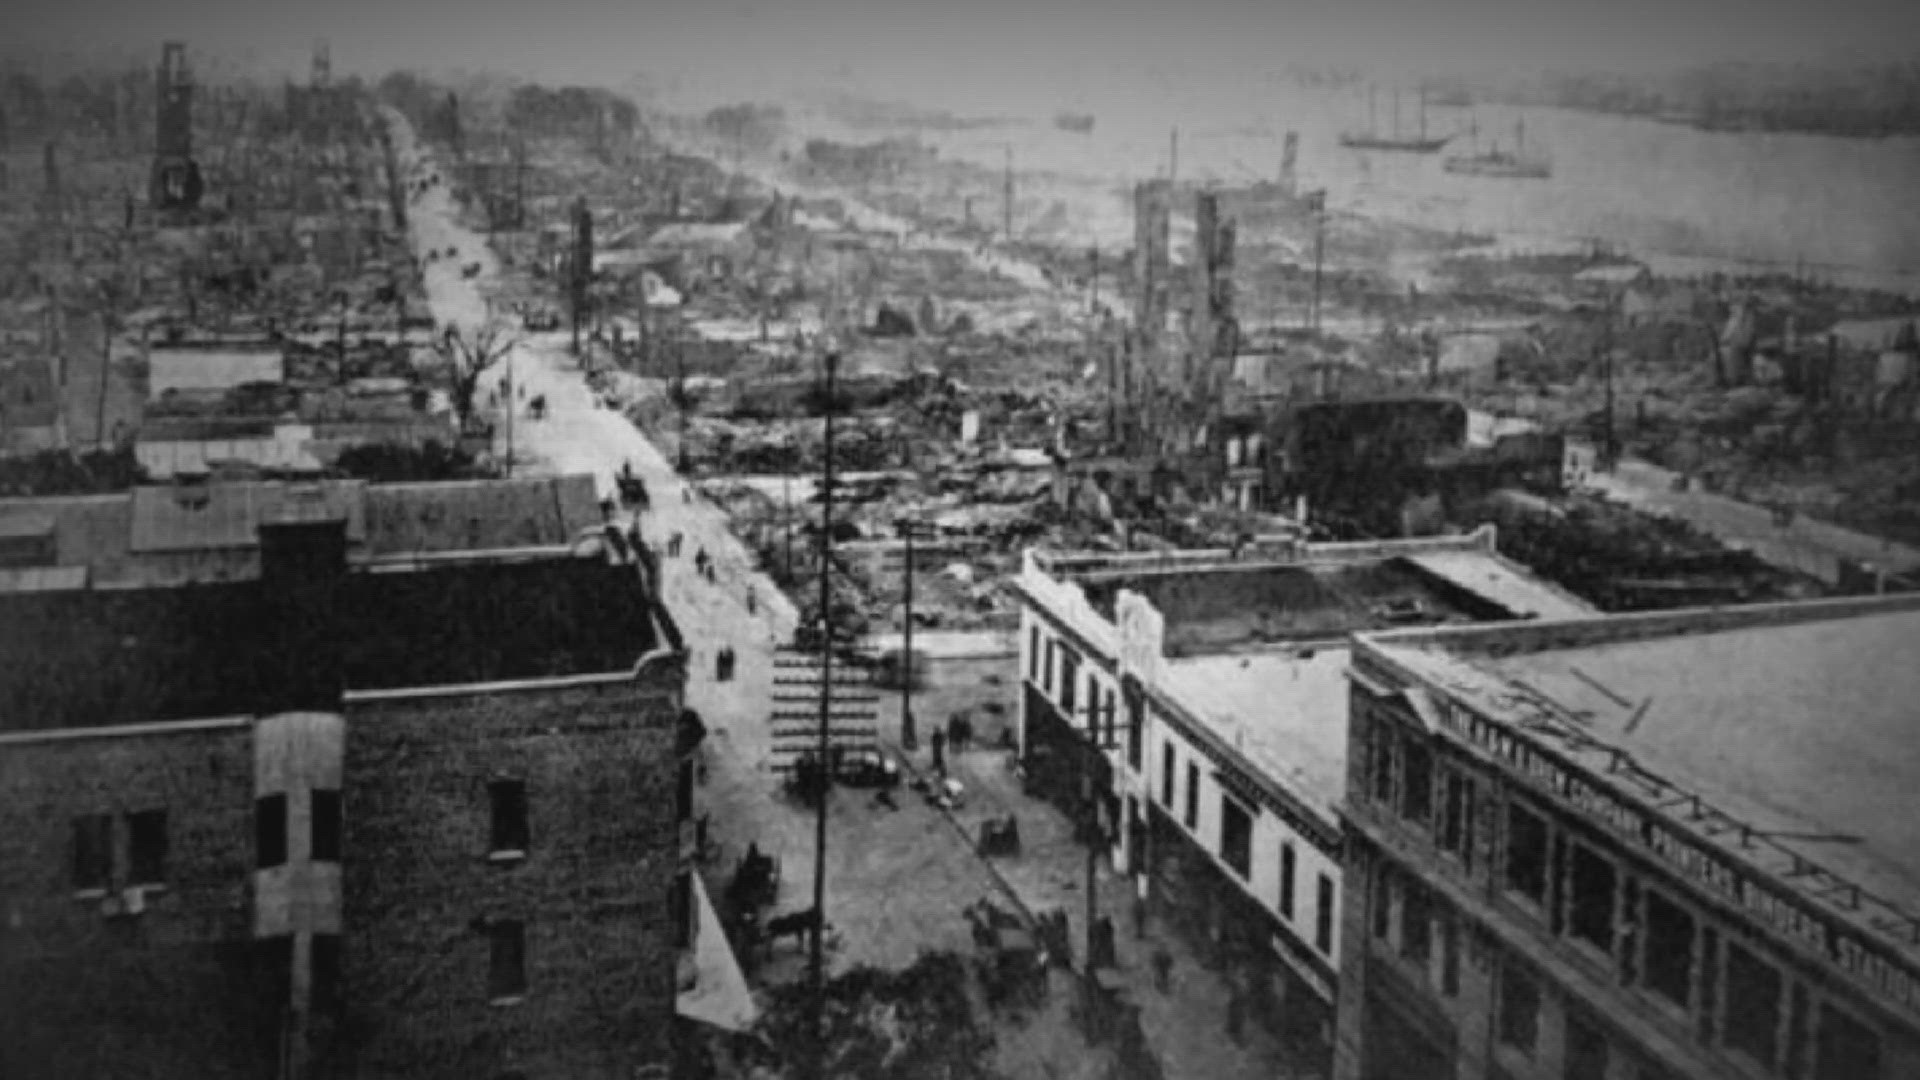 Nearly 150 city blocks were burned, seven people died from the fire and nearly 10,000 people were left homeless, according to the Jacksonville Historical Society.